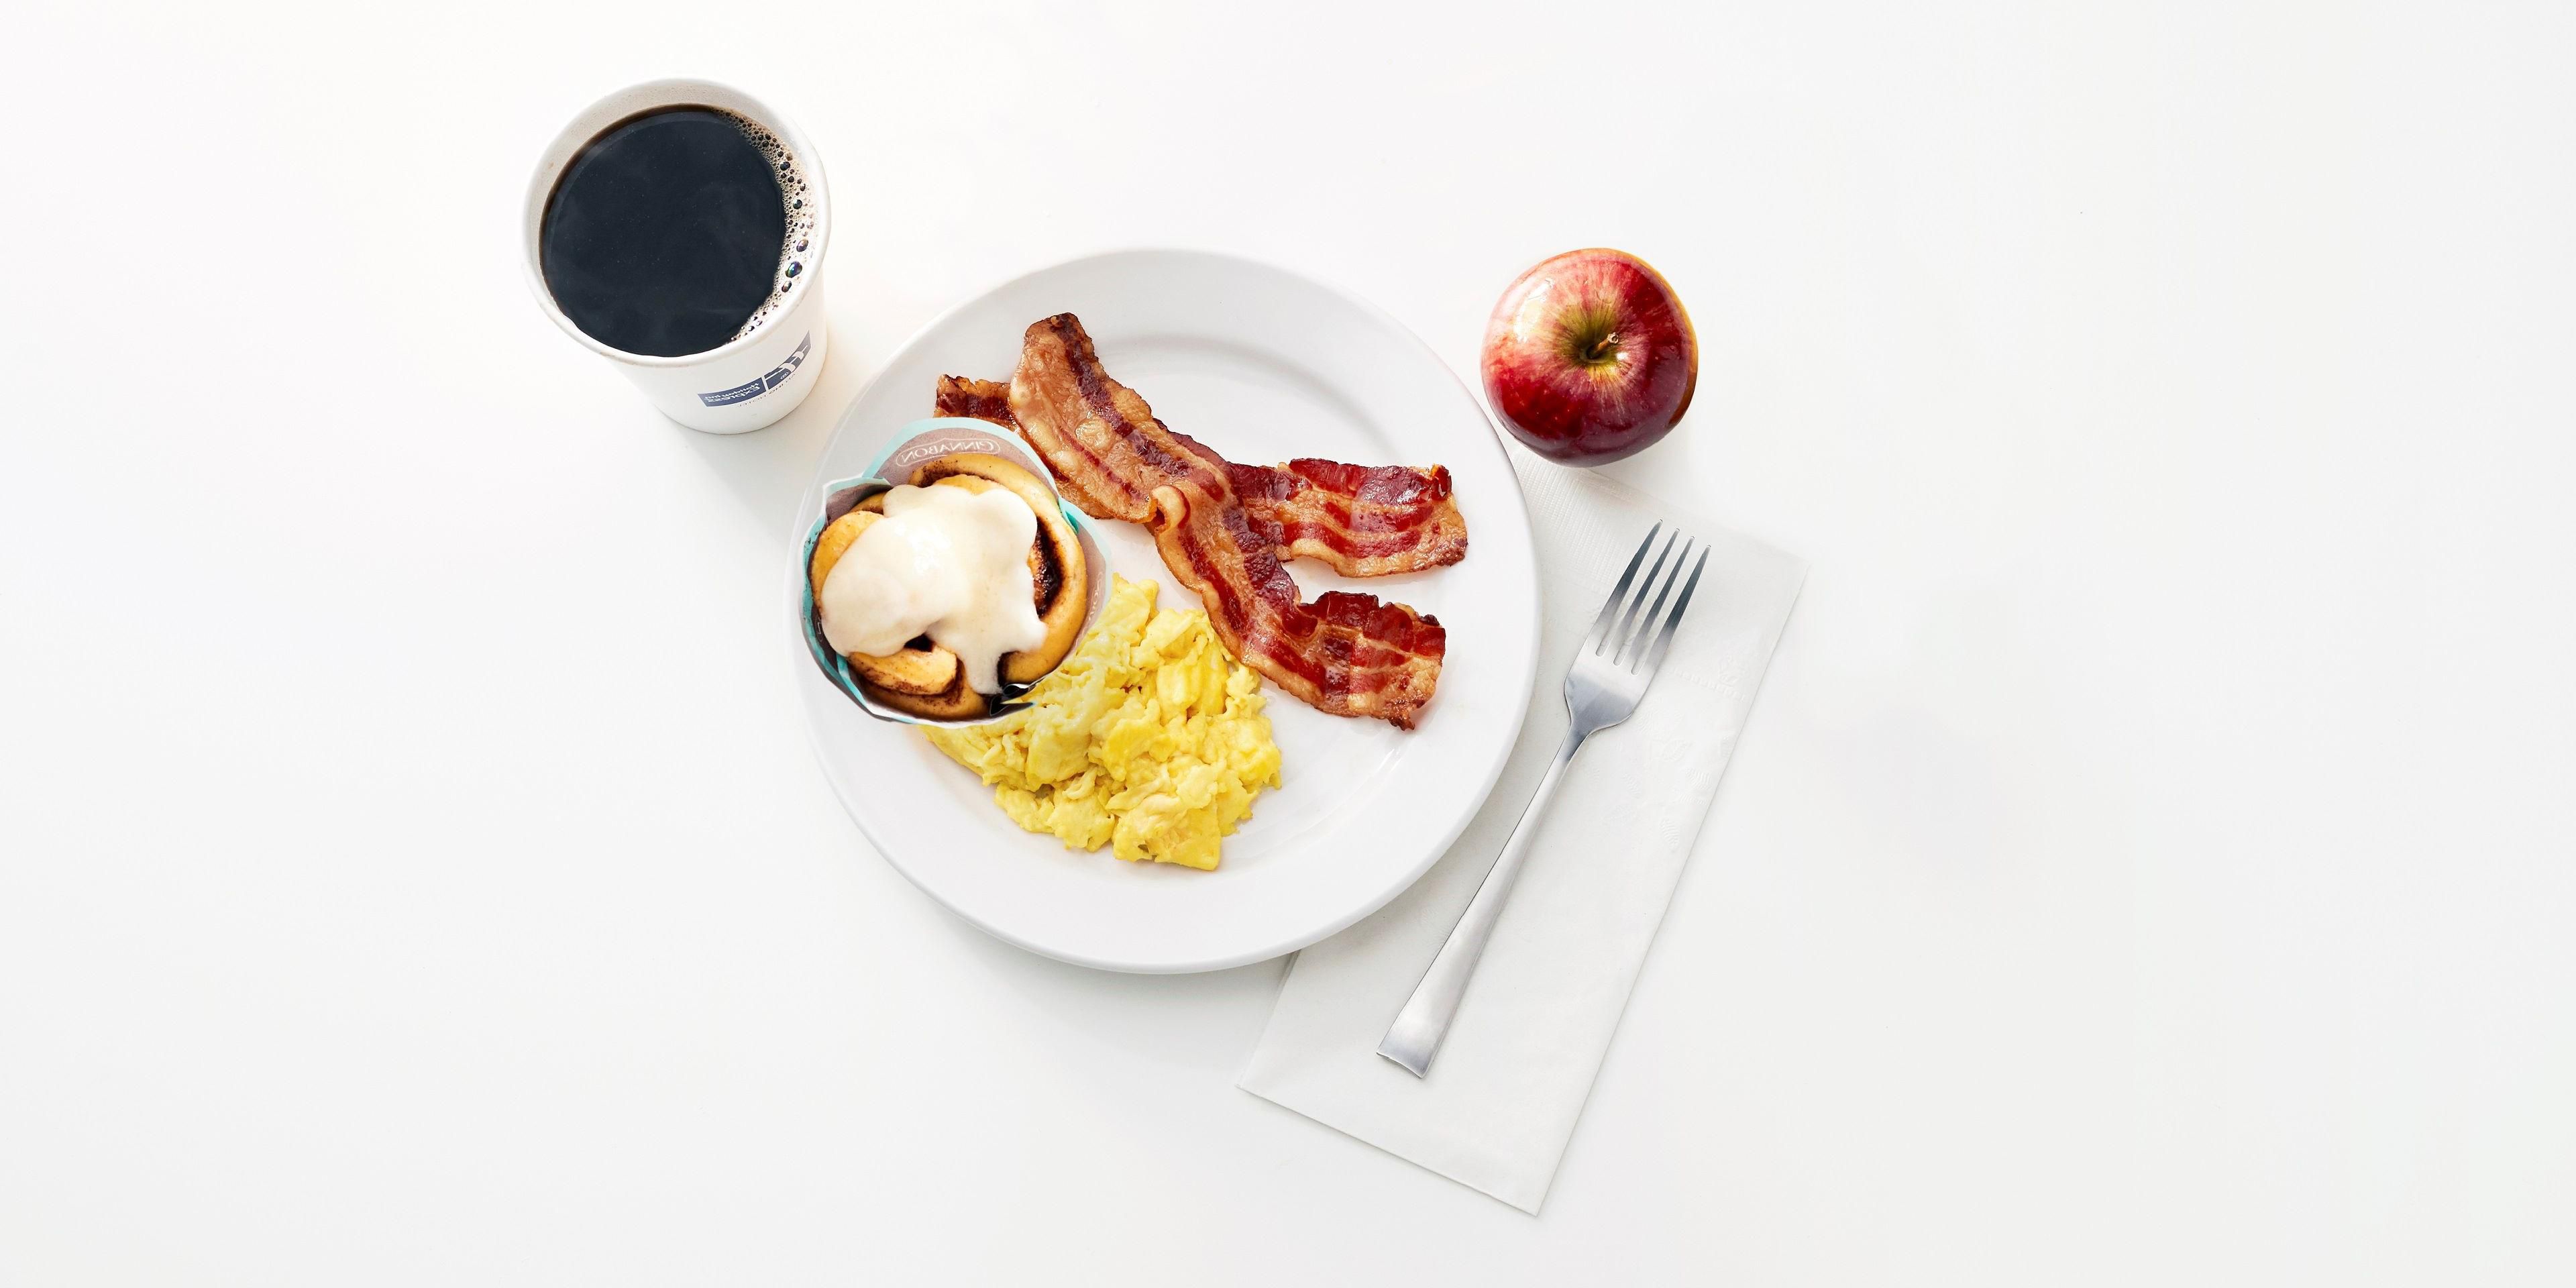 Kick start your day with our free Express Start Breakfast, with grab ‘n’ go options and favorites such as eggs and bacon, hot pancakes, our signature cinnamon rolls and fresh coffee. Offered from 6:00 AM to 9:00 AM.